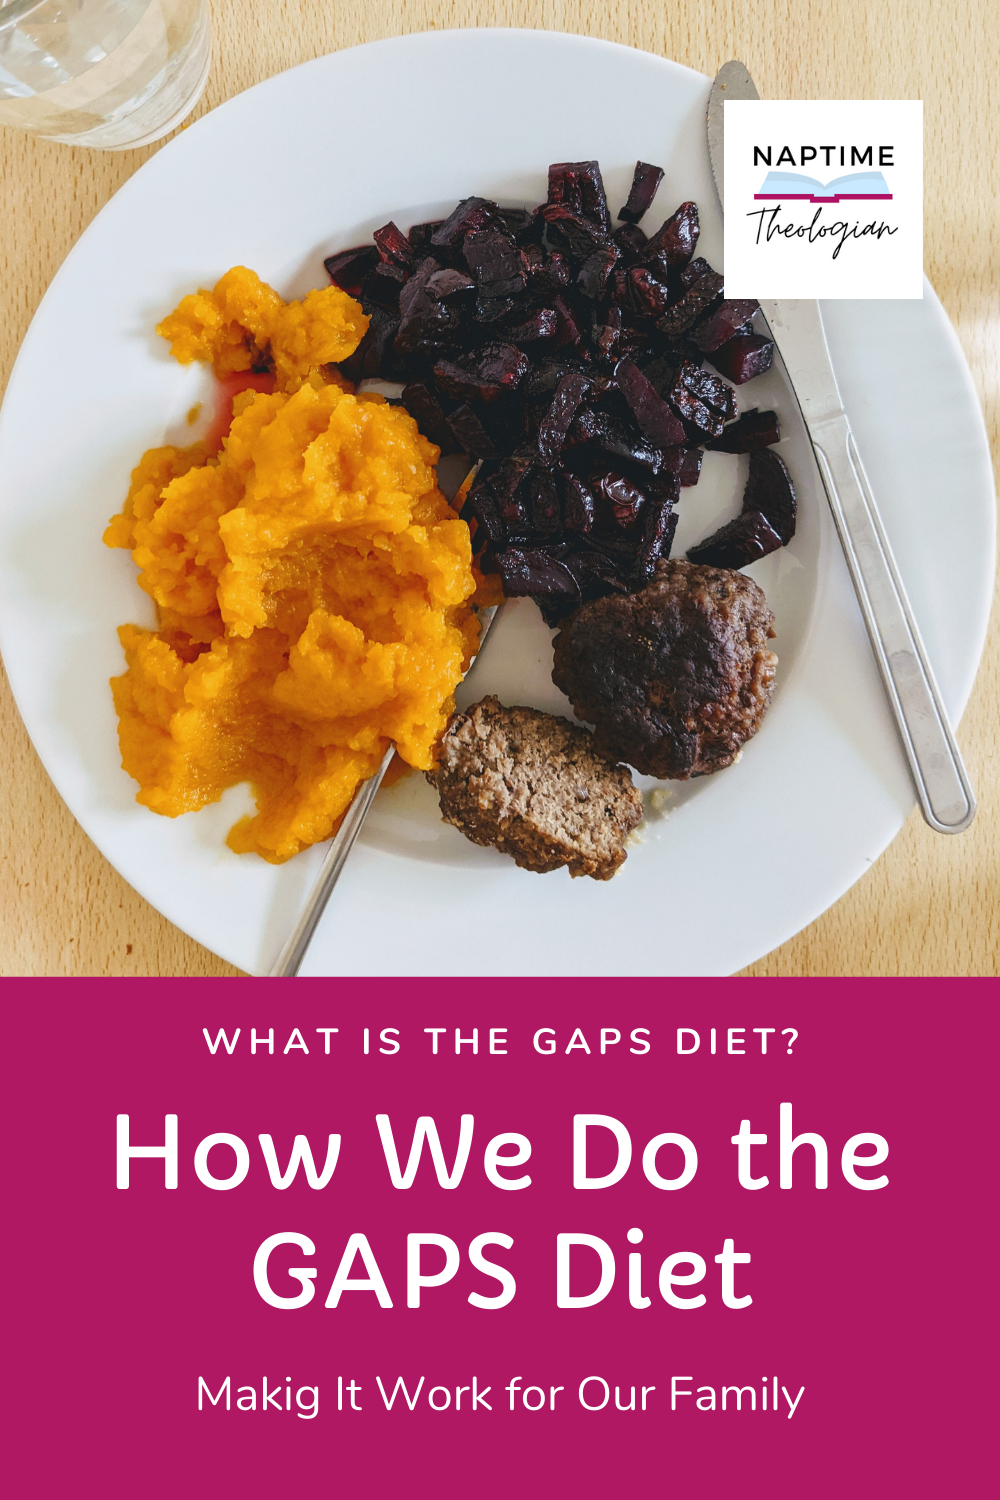 How We Make the GAPS Diet Work in Our Family